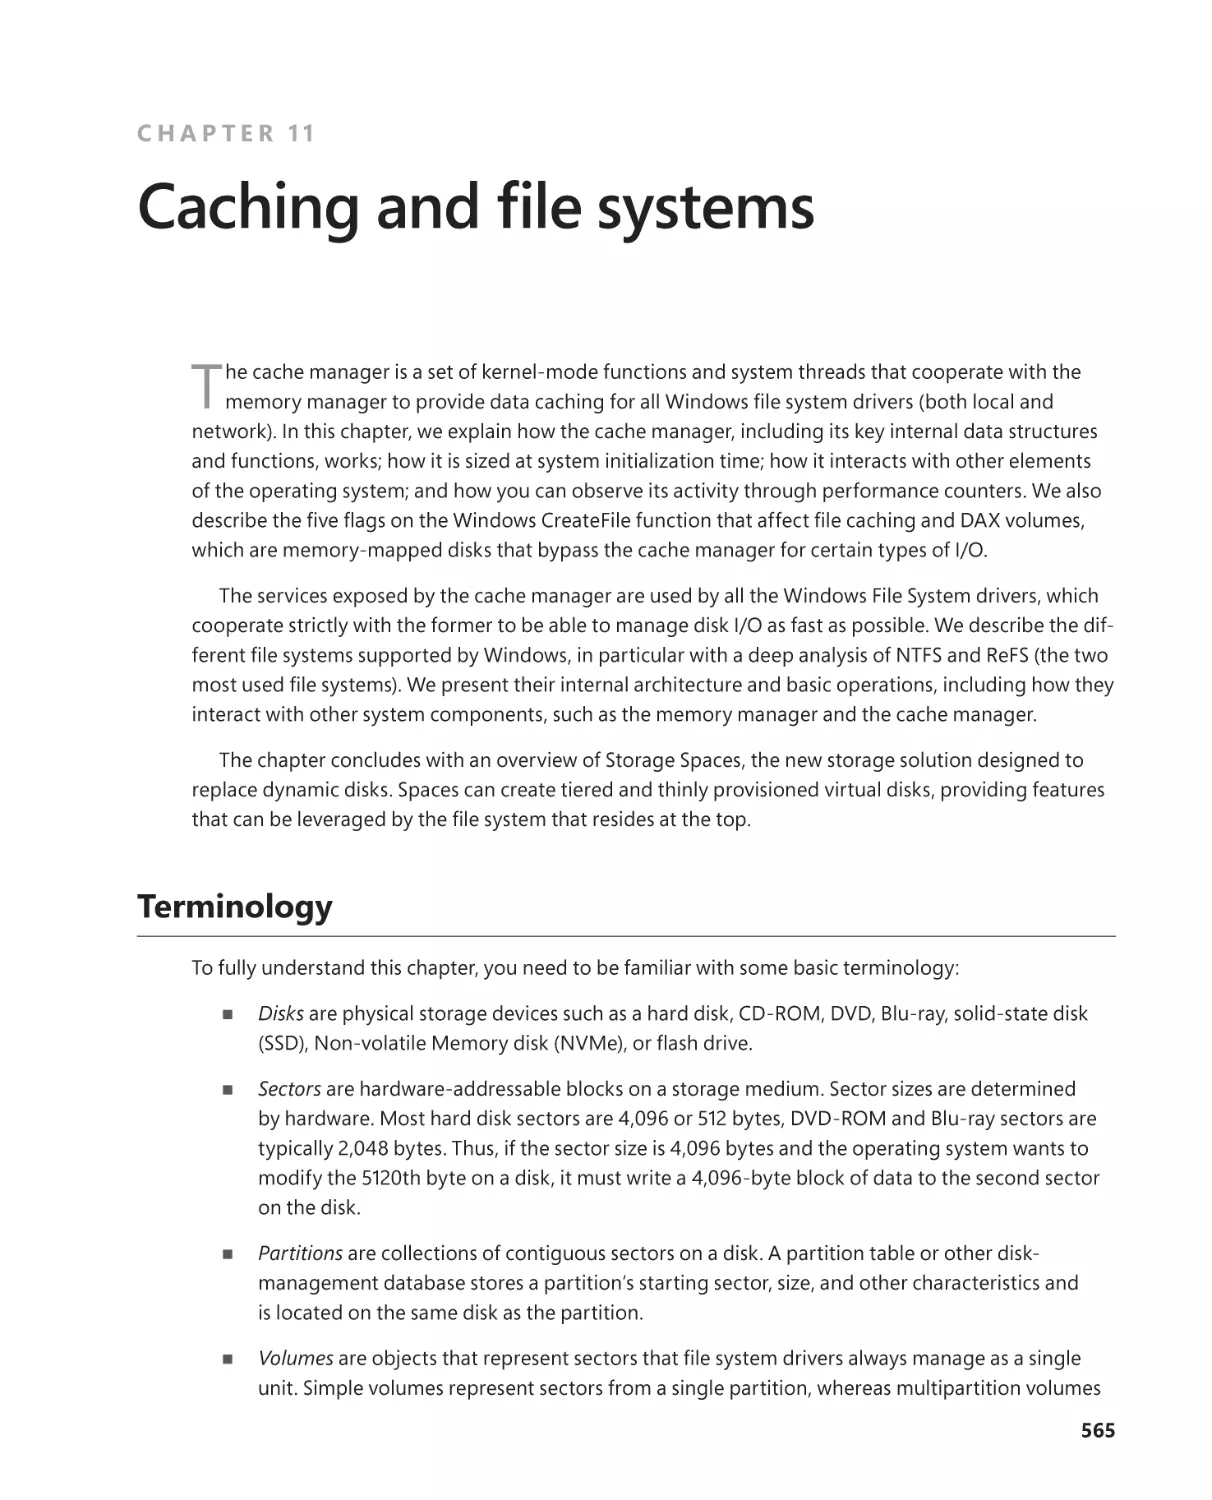 Chapter 11 Caching and file systems
Terminology